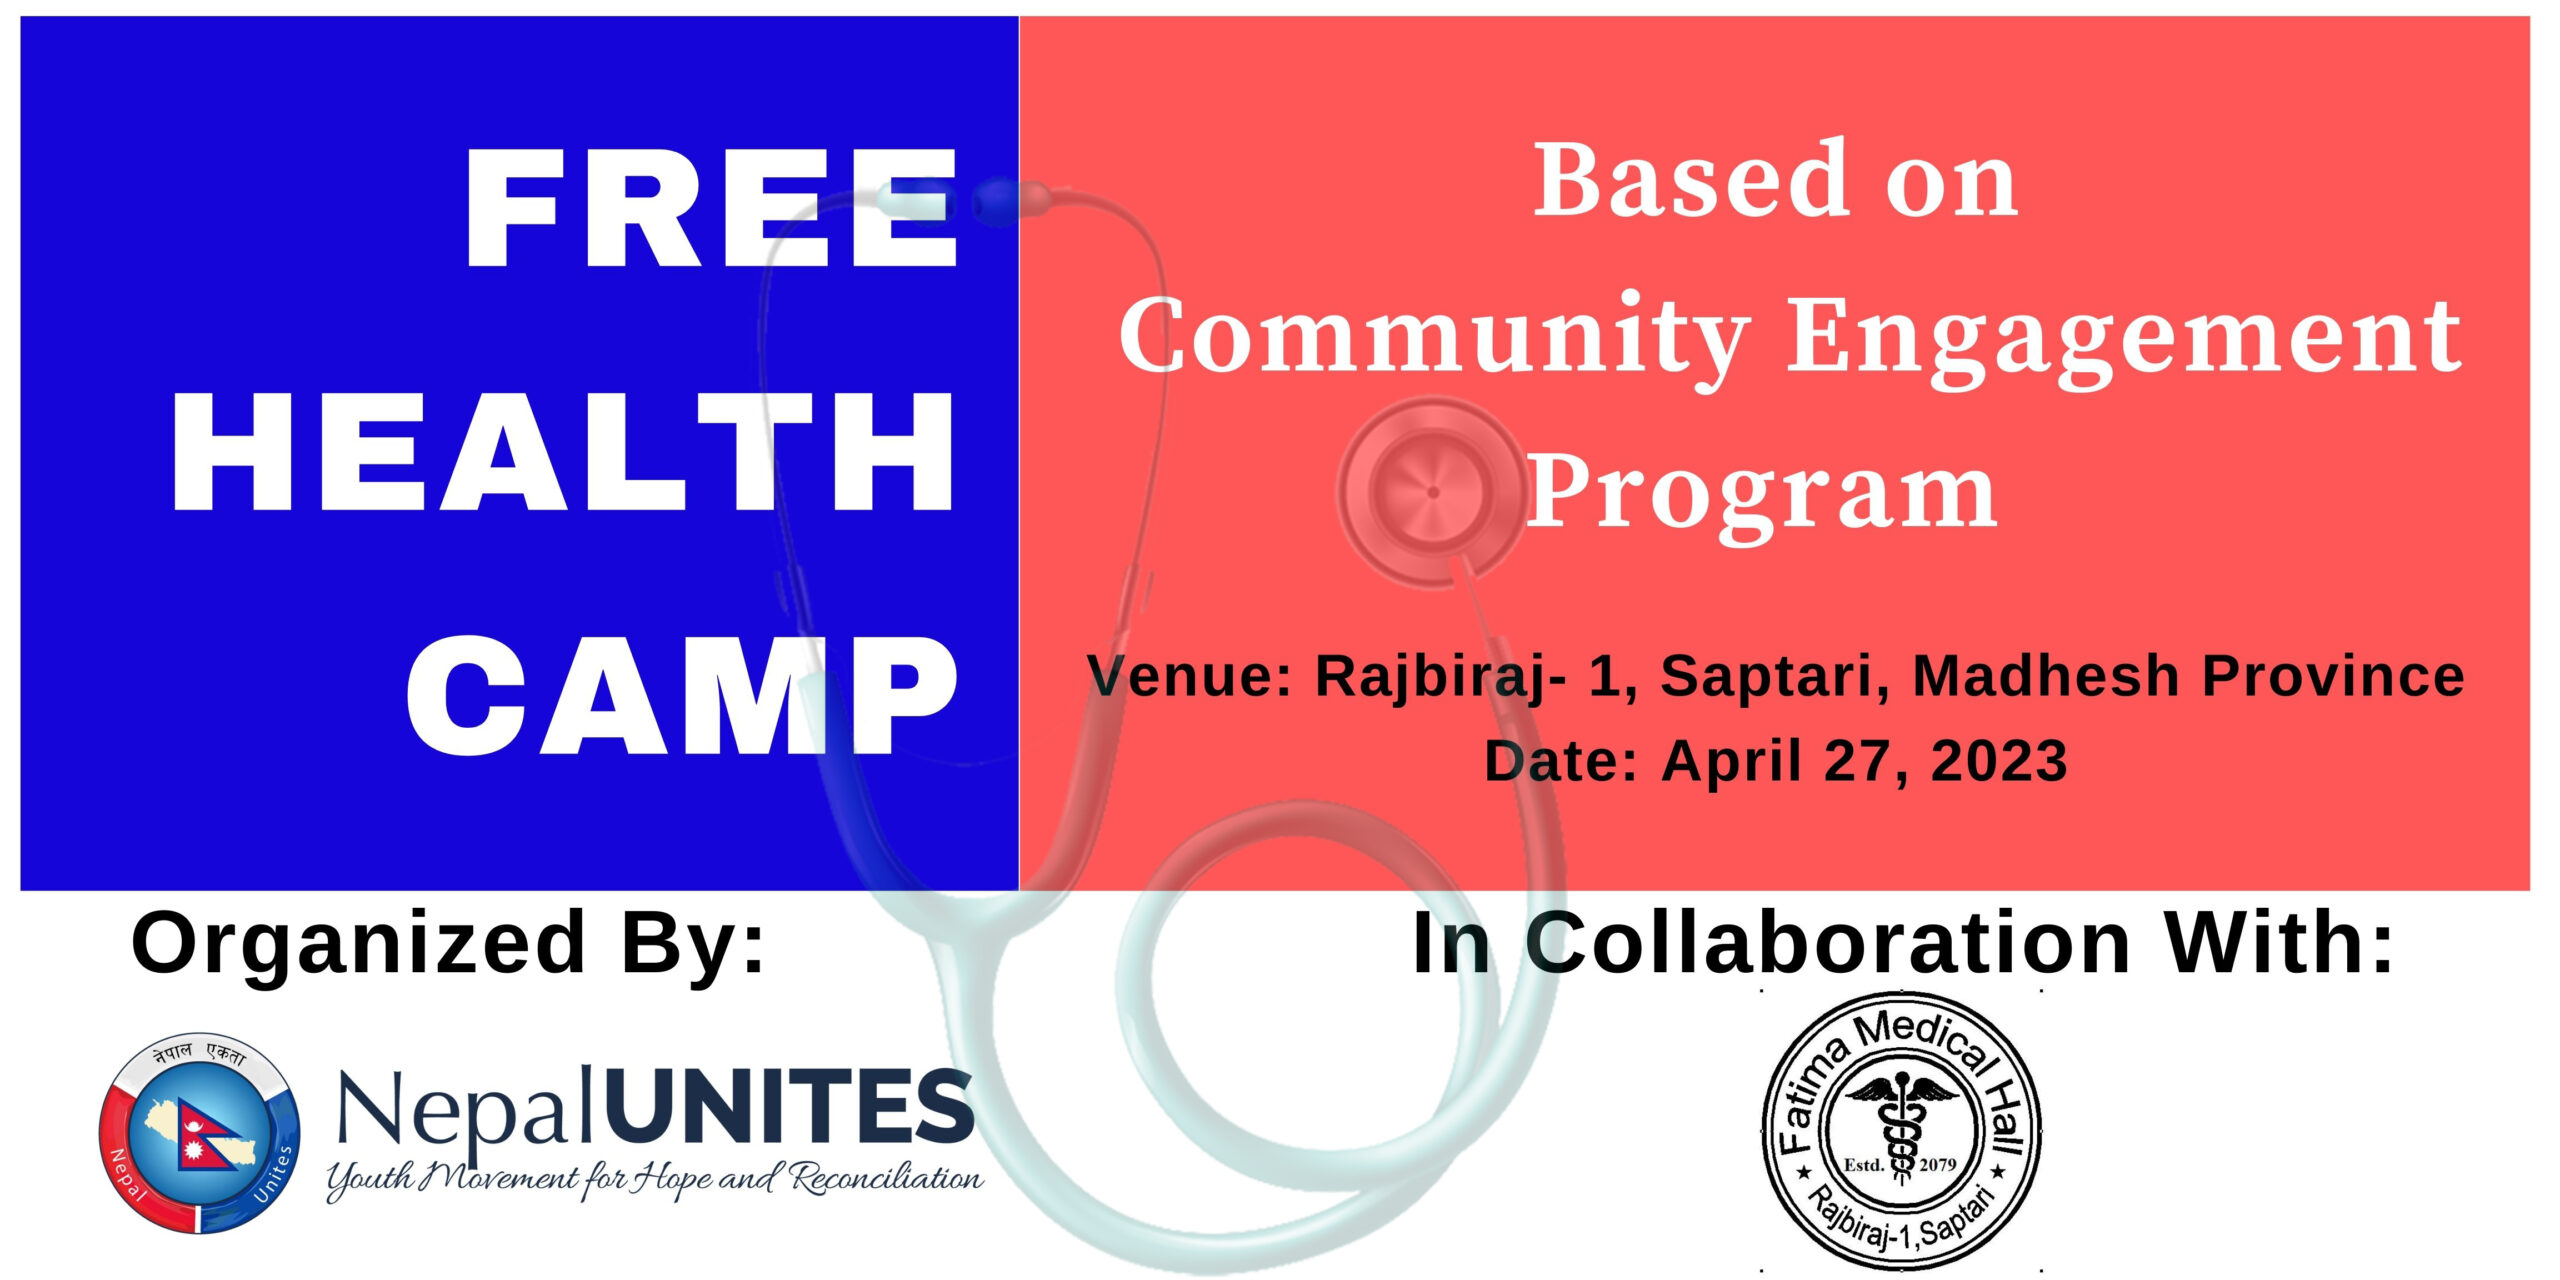 A One-Day Free Health Camp Conducted